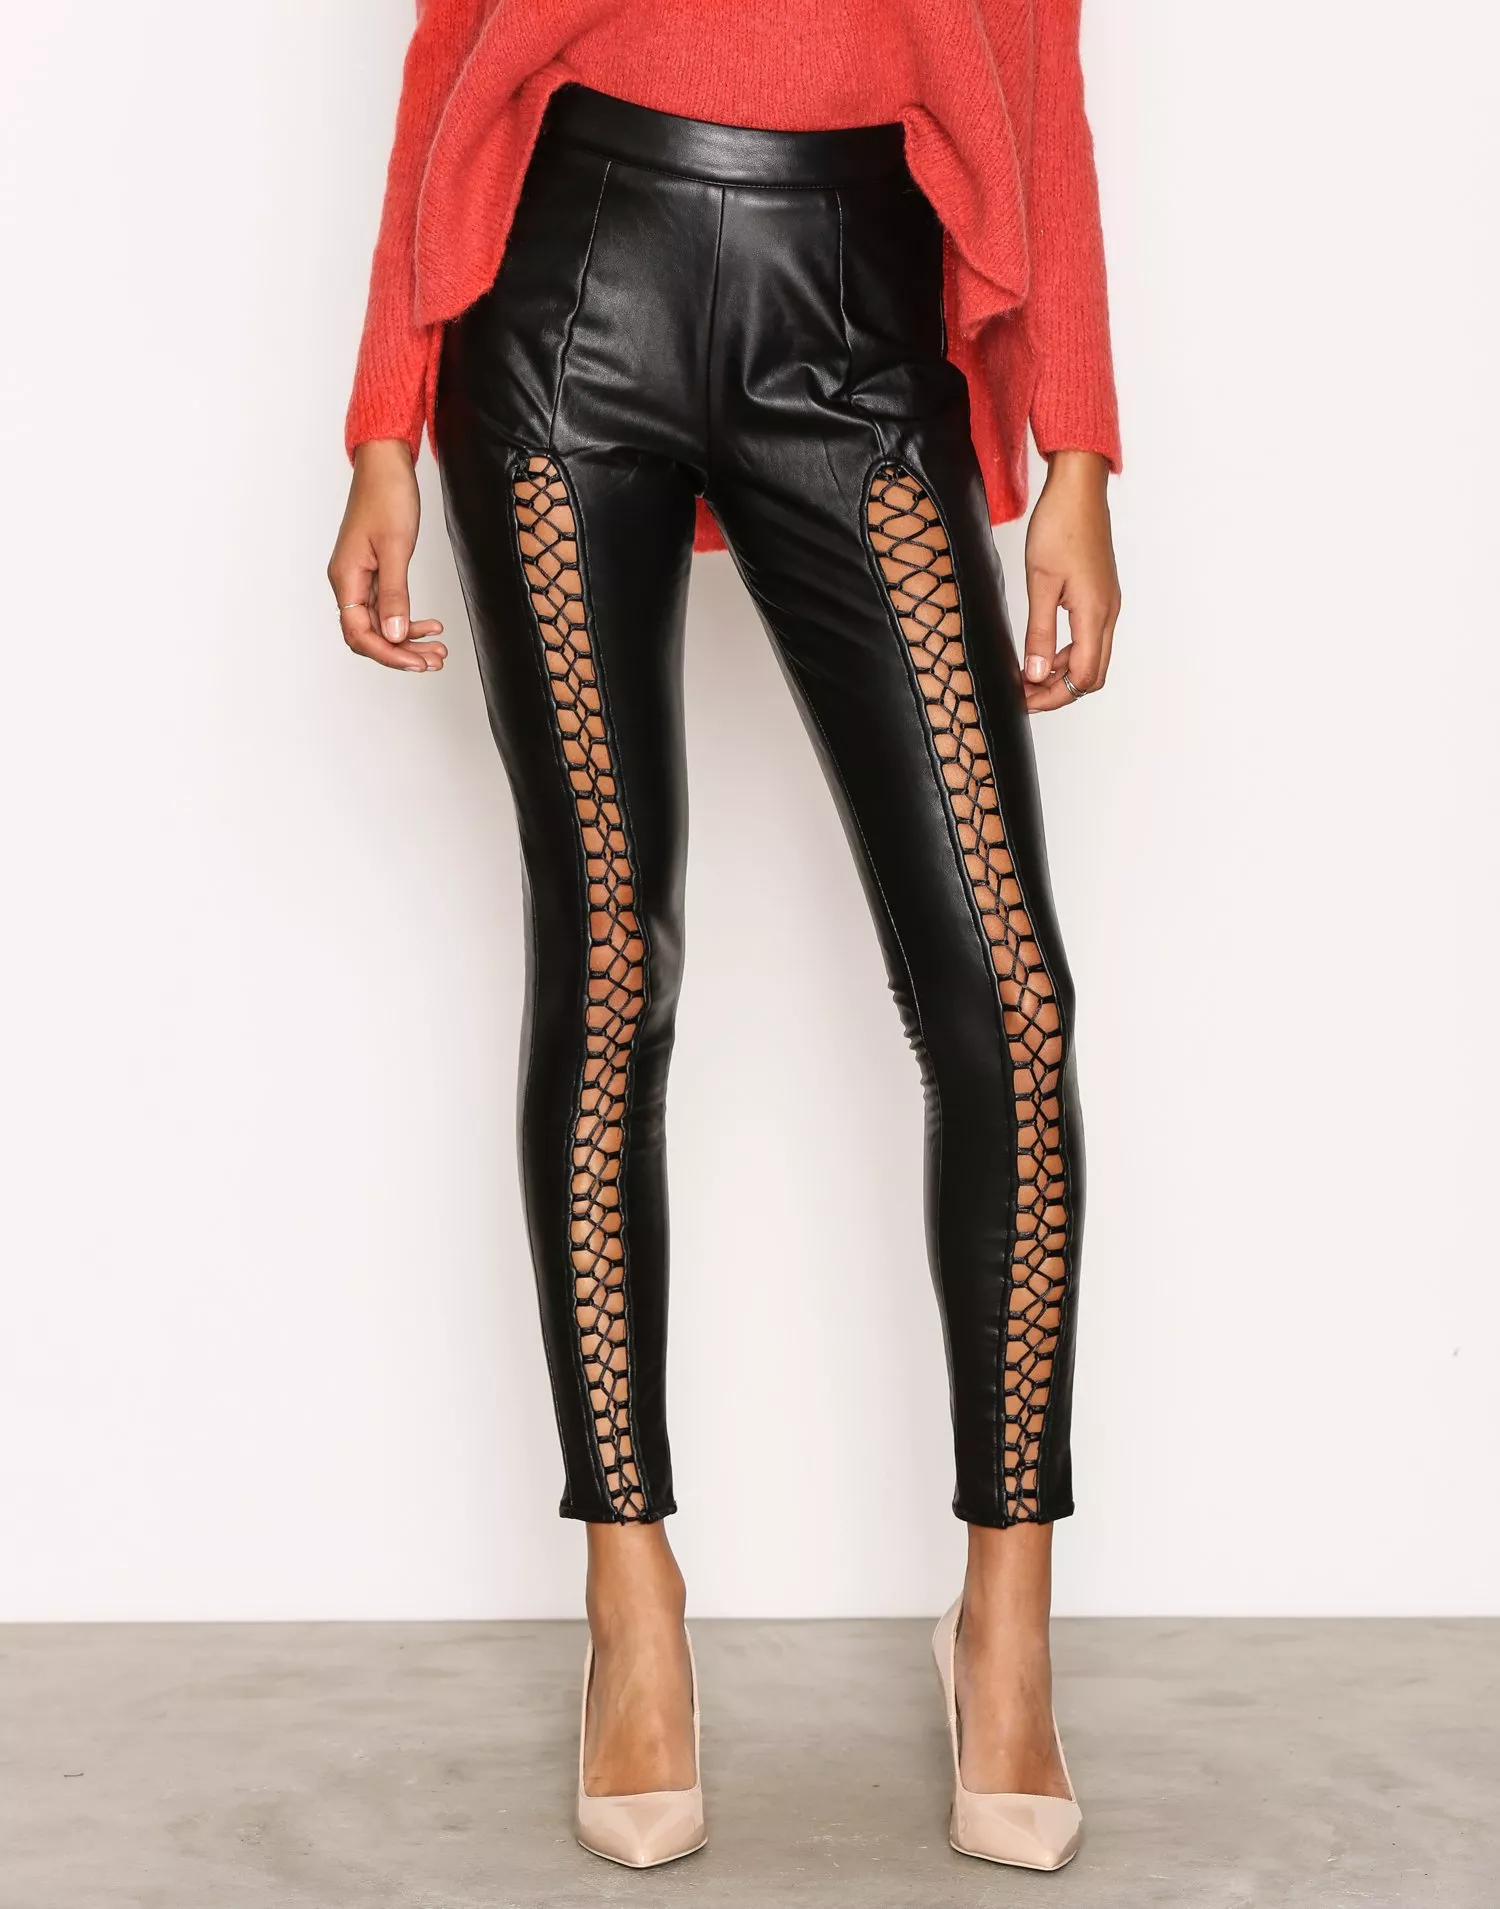 Missguided is selling £40 faux leather trousers with lace-up detailing -  and we're not sure what to make of them